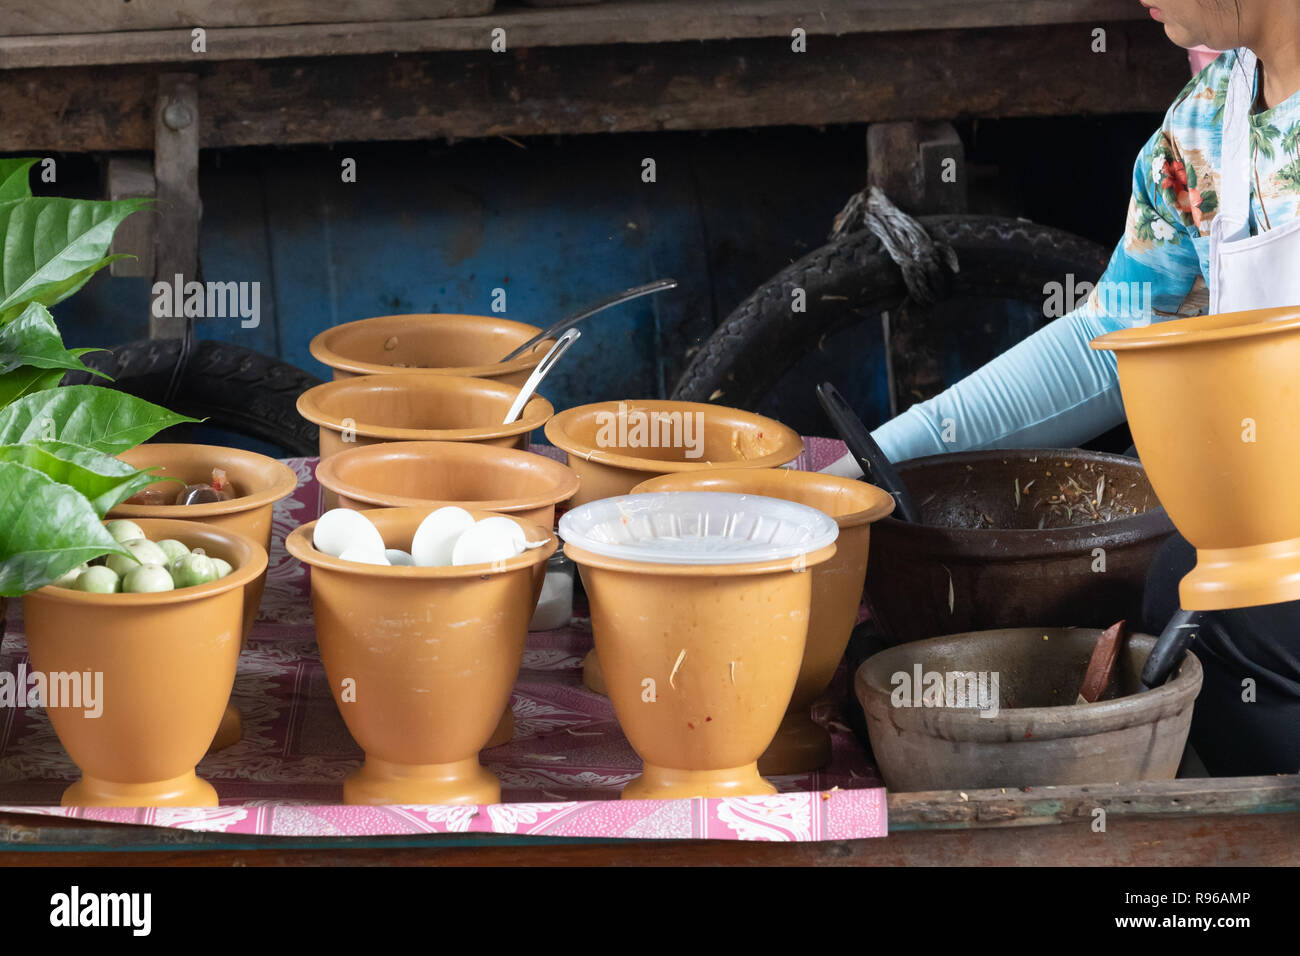 Floating market food preparation in bowls. Stock Photo